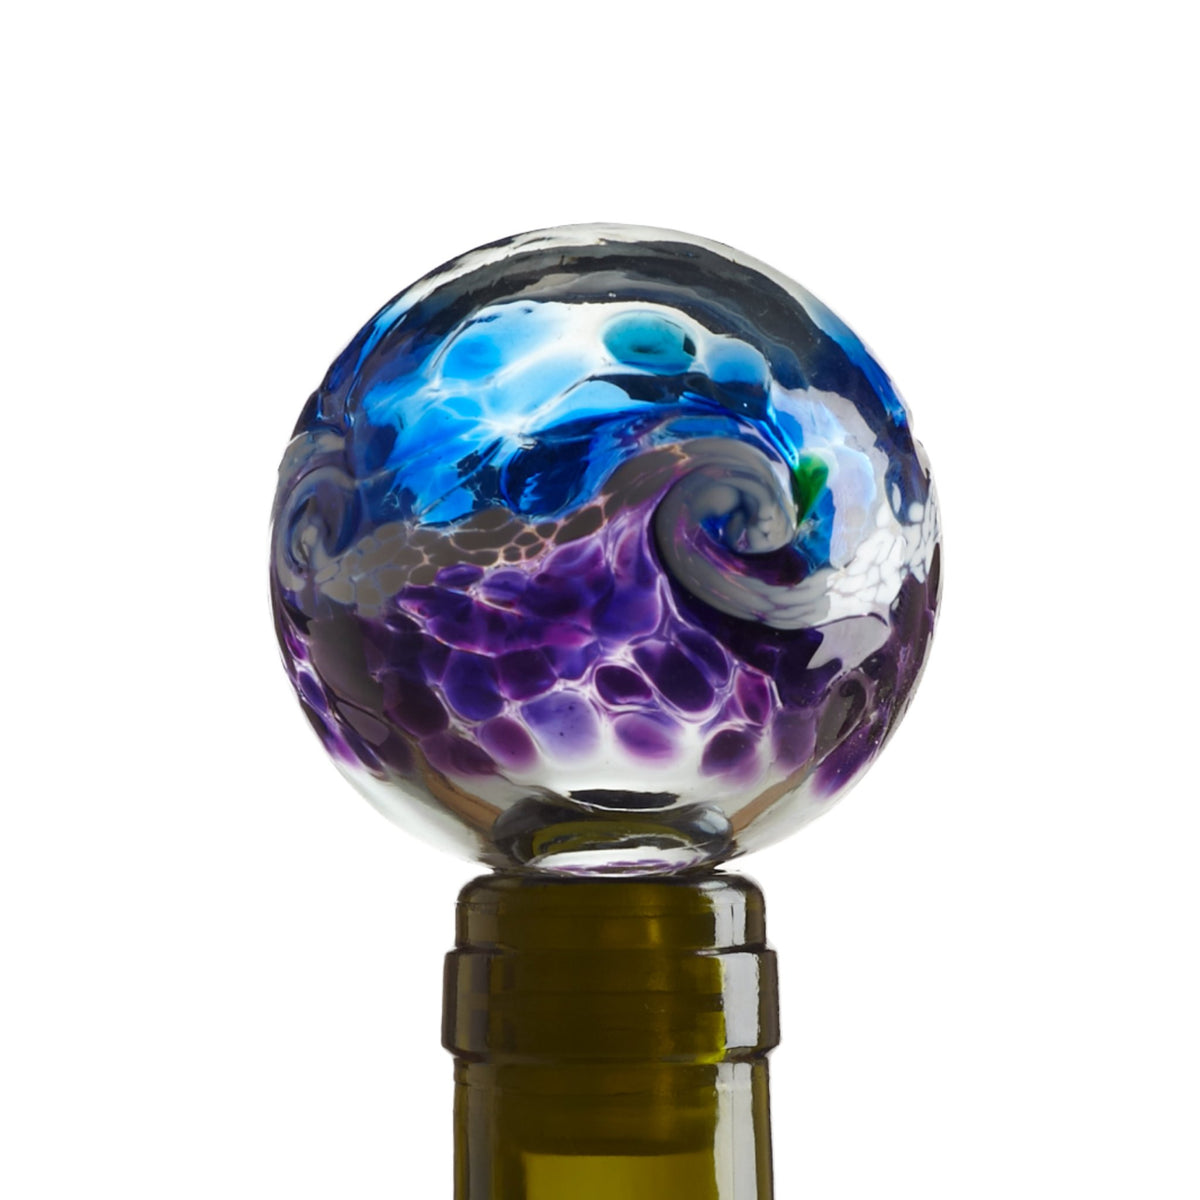 Blown glass globe wine stopper with spatterings of transparent blue on the top half and transparent purple on the bottom. The two colors meet in a swirl of white and gray that looks like a wave. Pictured in the neck of a green wine bottle.